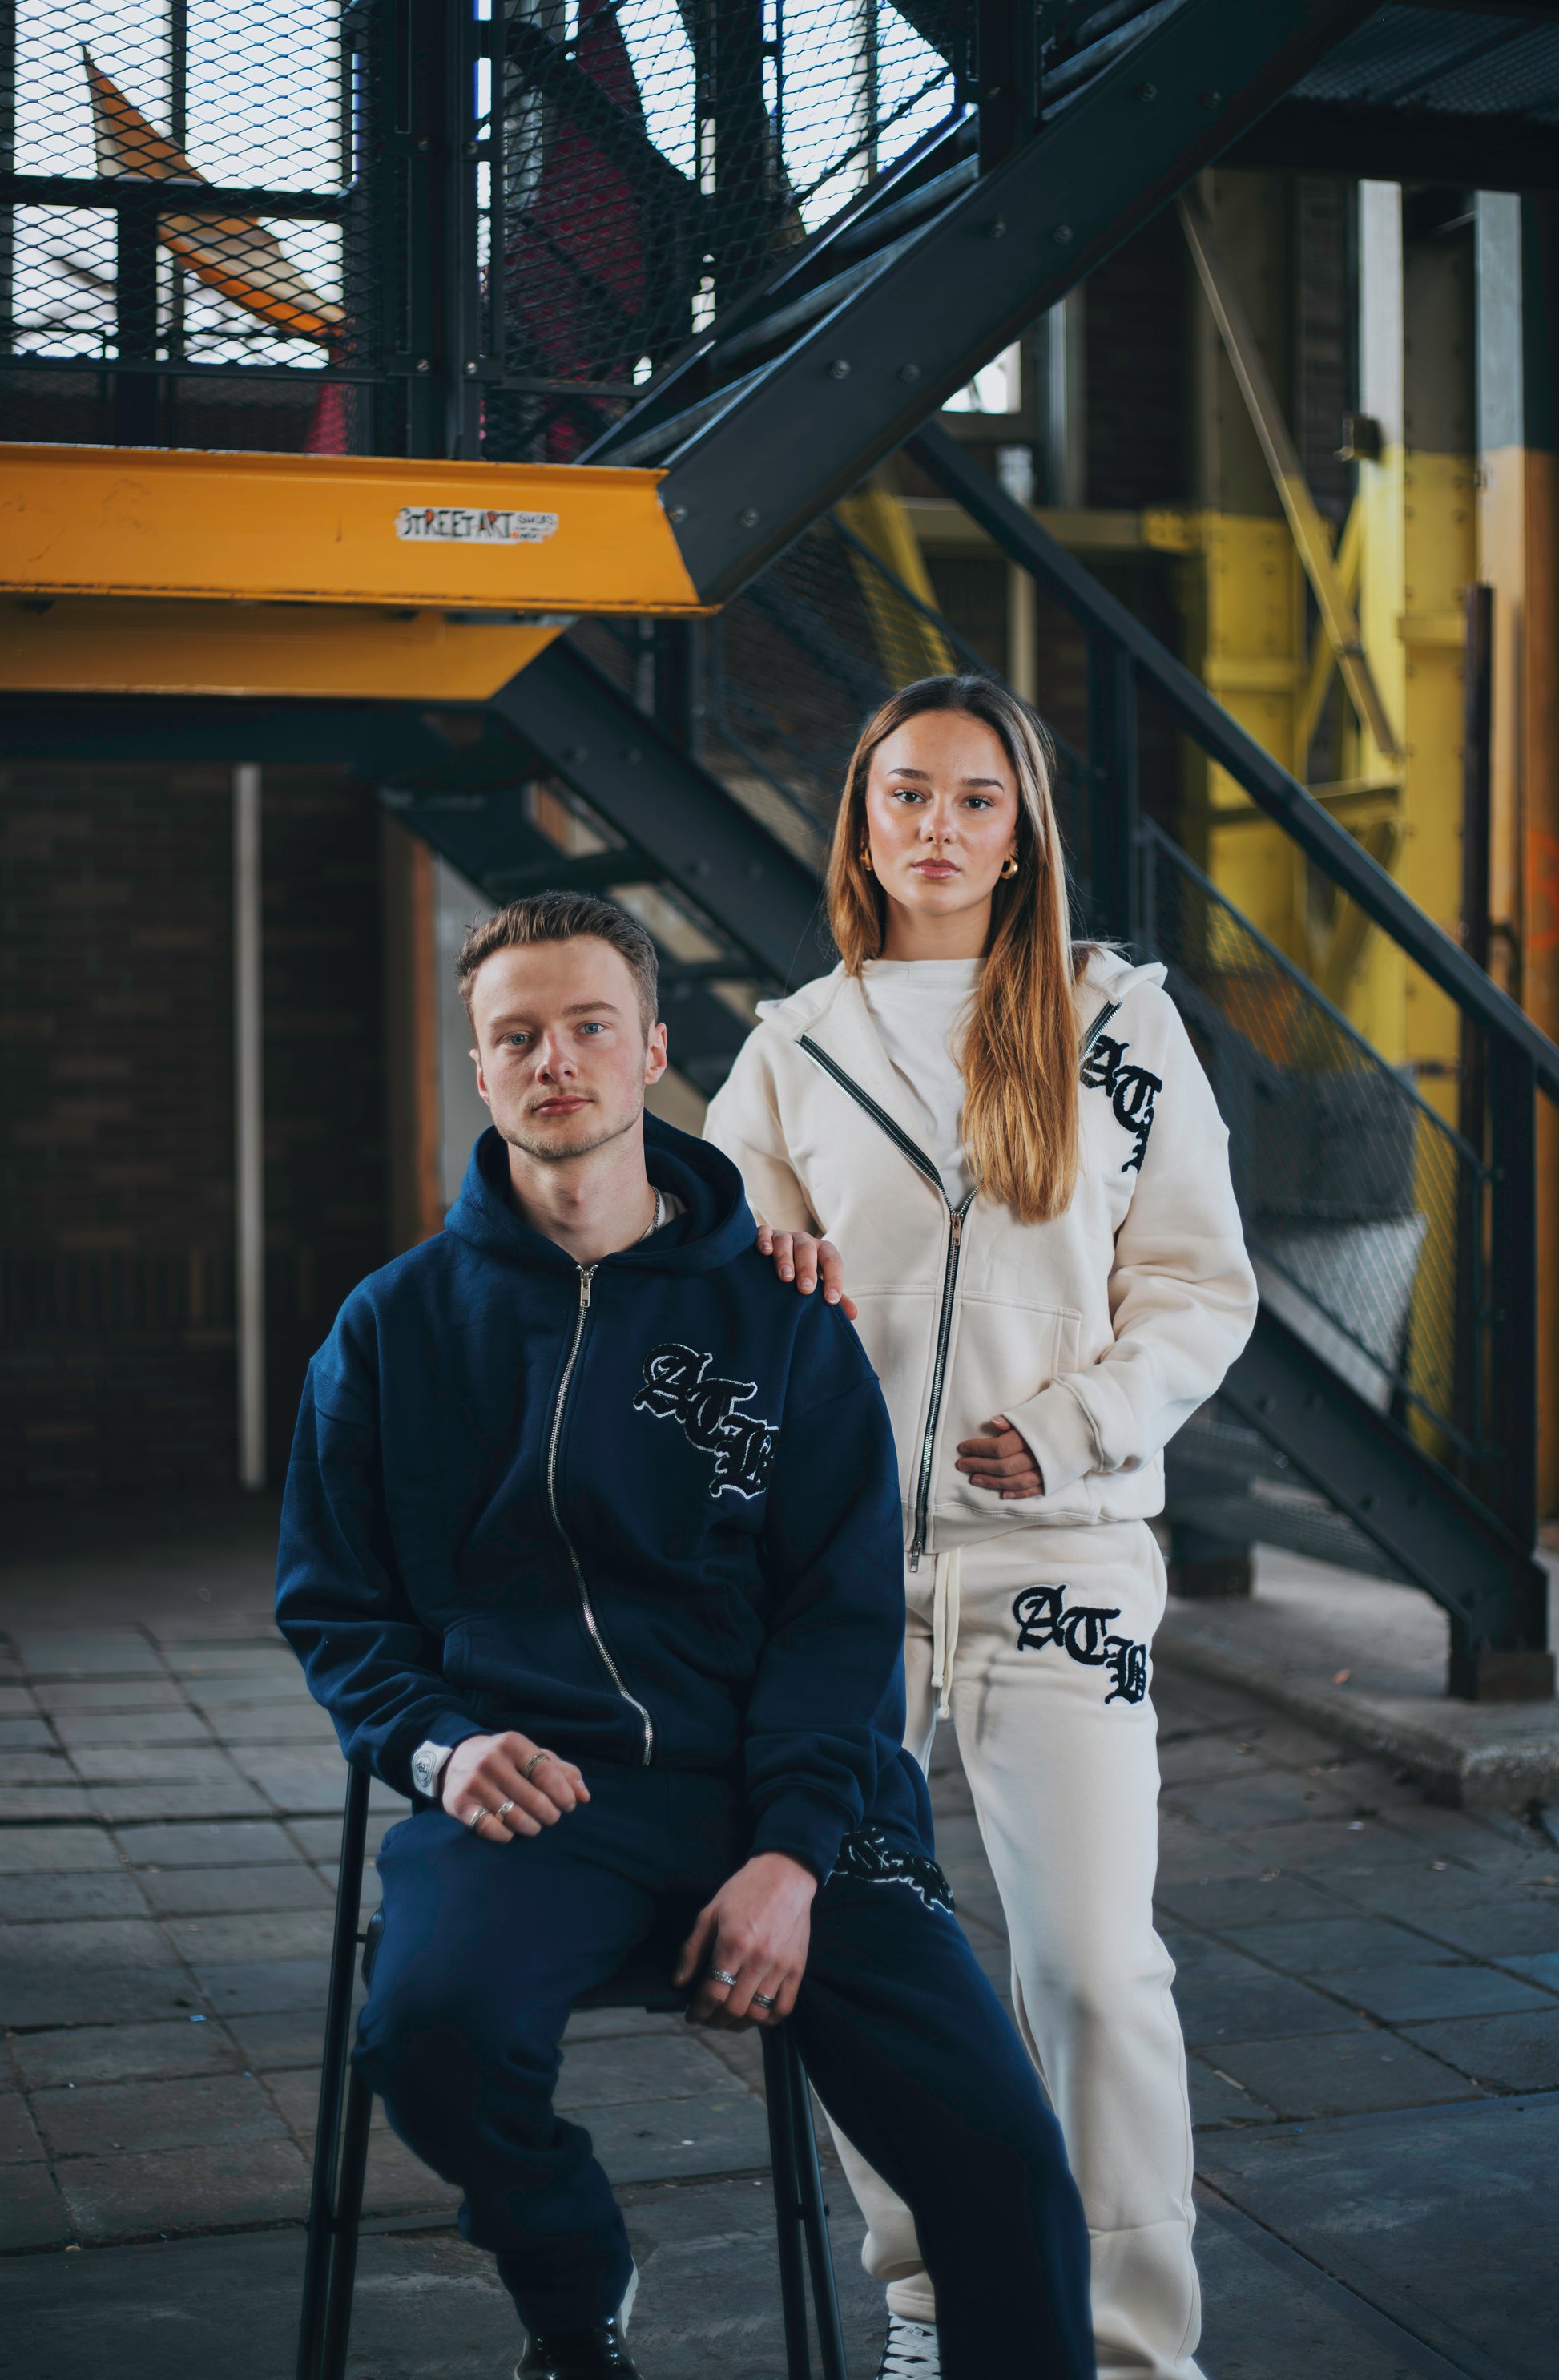 The Youth Collective Tracksuit - Attractedtoblack